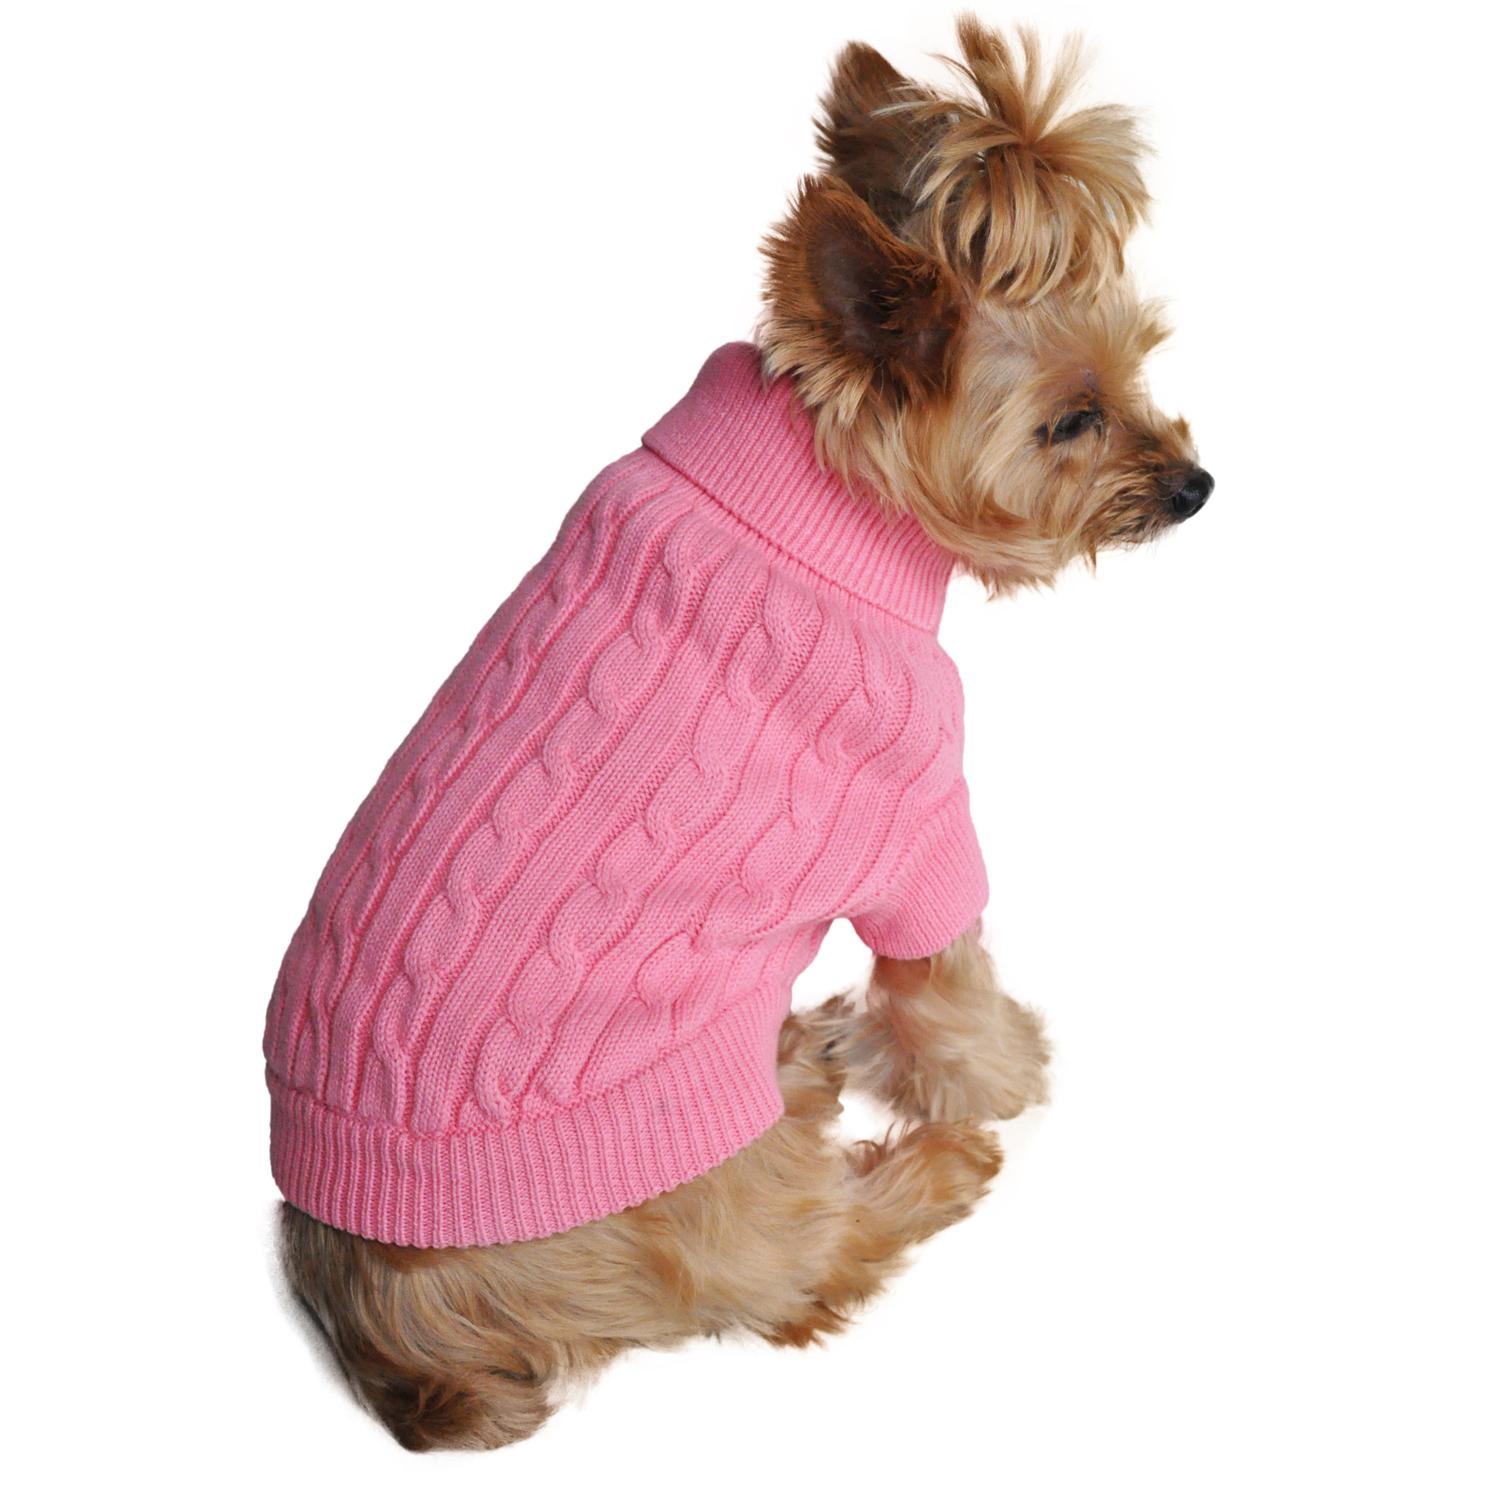 Cable Knit Dog Sweater by Doggie Design - Candy Pink